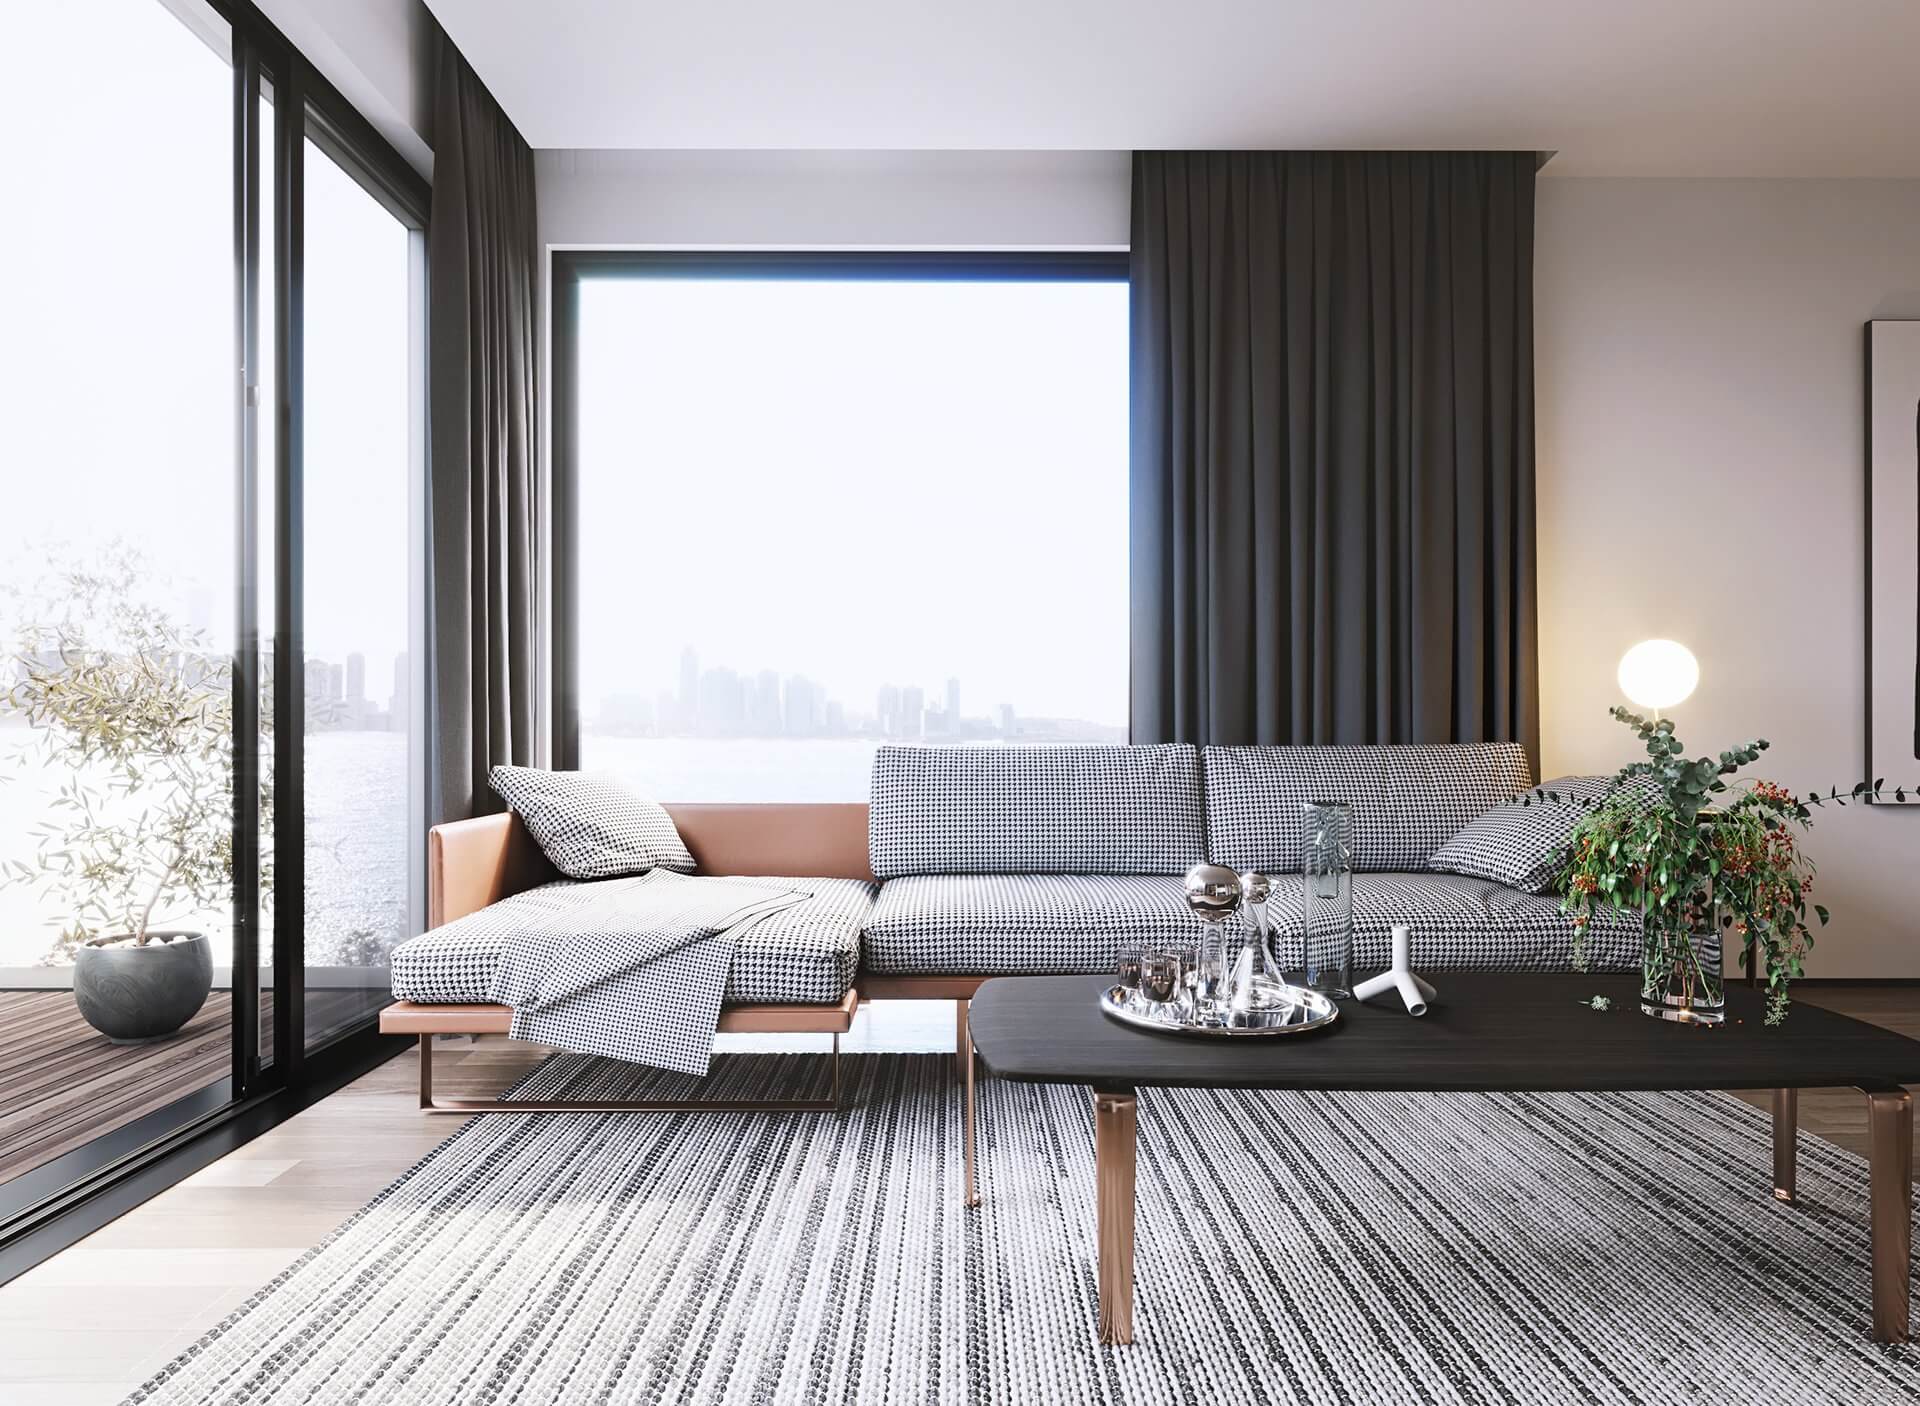 Penthouse with flair - cgi visualization 3